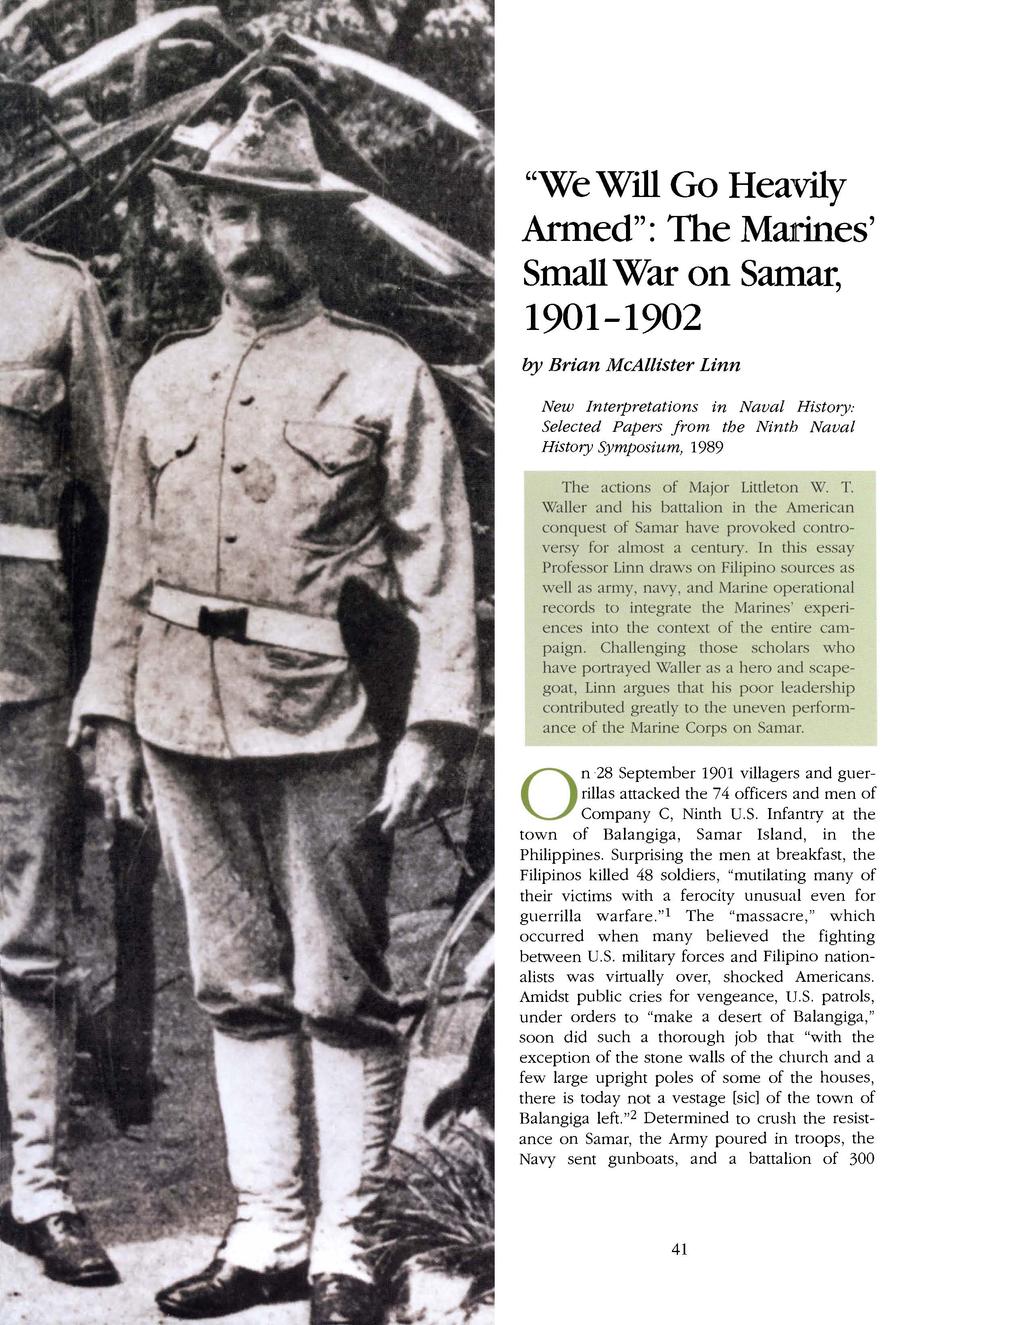 "We Will Go Heavily Armed": The Marines' Small War on Samar, 1901-1902 by Brian McAllister Linn New Interpretations in Naval Hist01y: Selected Papers from the Ninth Naval History Symposium, 1989 The